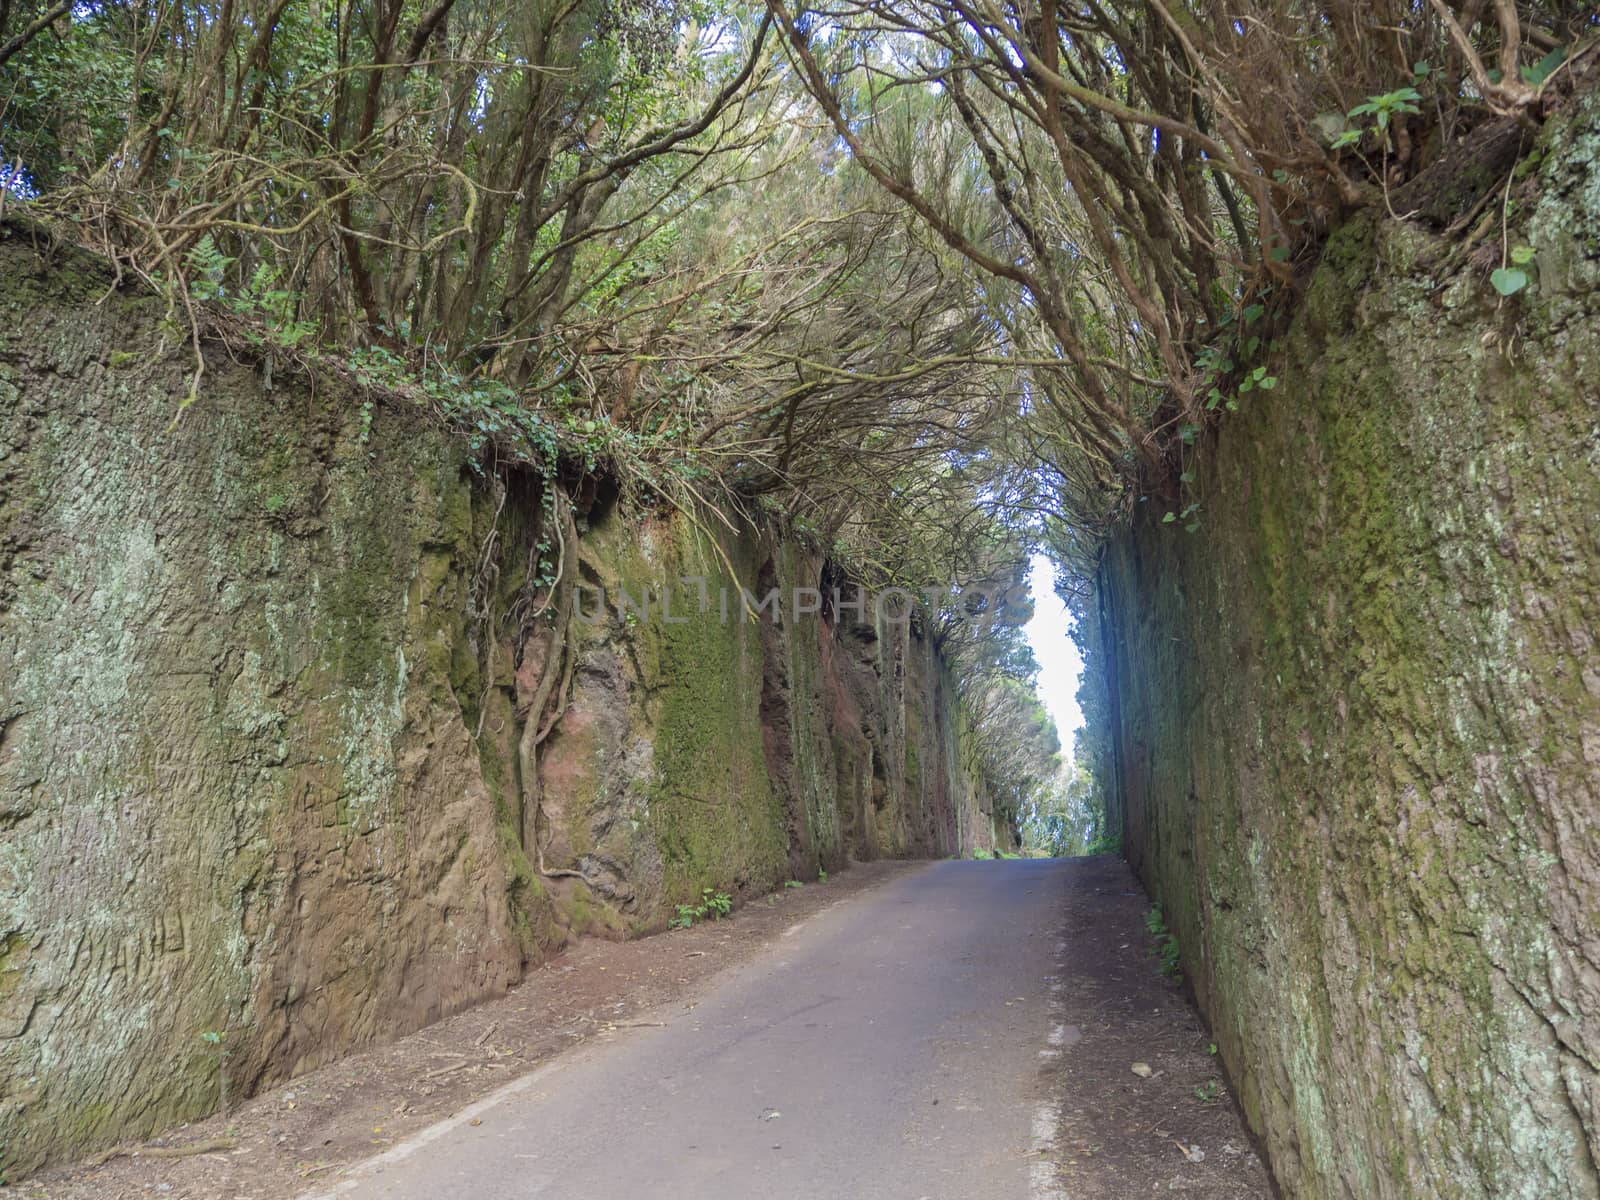 narrow asphalt road going through stone tunnel in mystery primary Laurel forest Laurisilva rainforest with old green mossed tree and climbing ivy in anaga mountain, tenerife  canary island spain